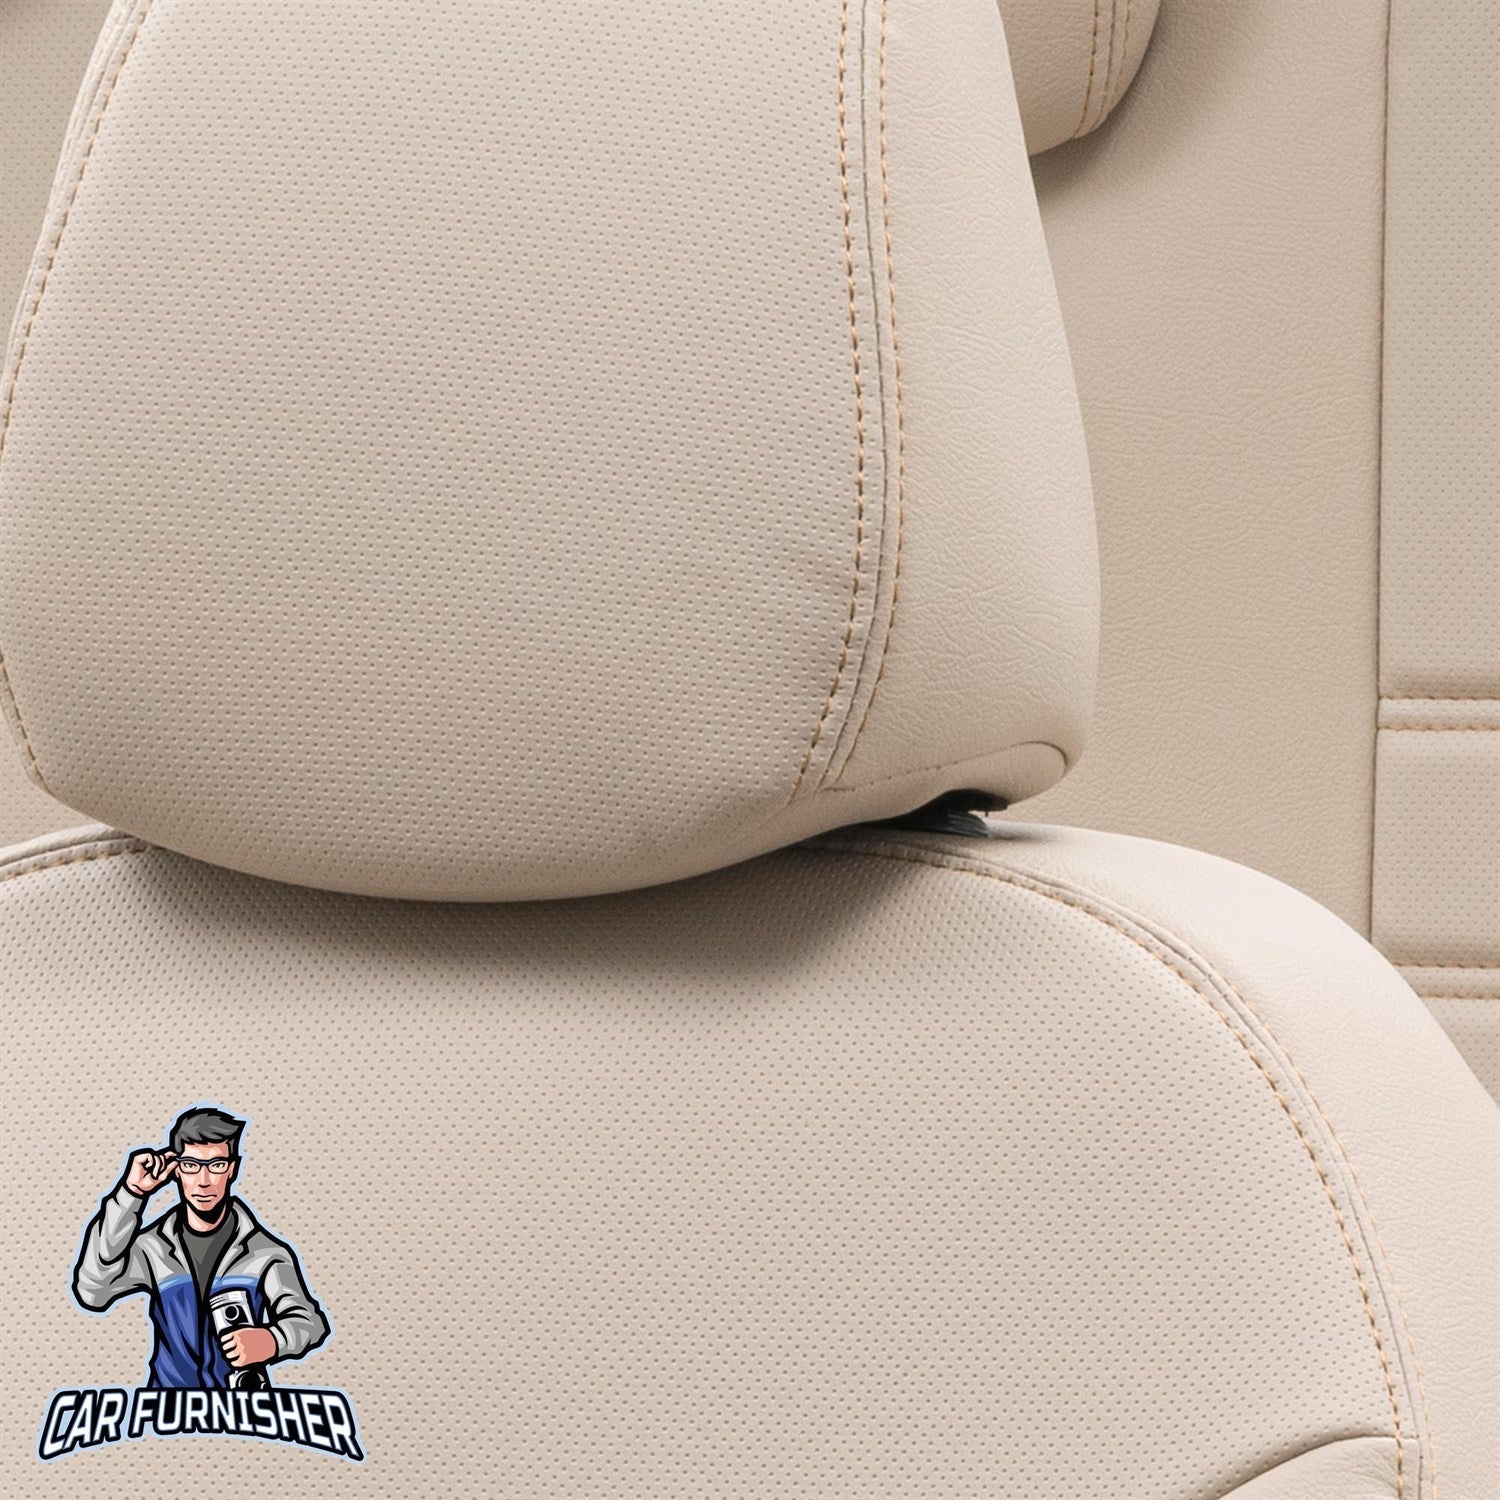 Fiat Stilo Seat Covers Istanbul Leather Design Beige Leather